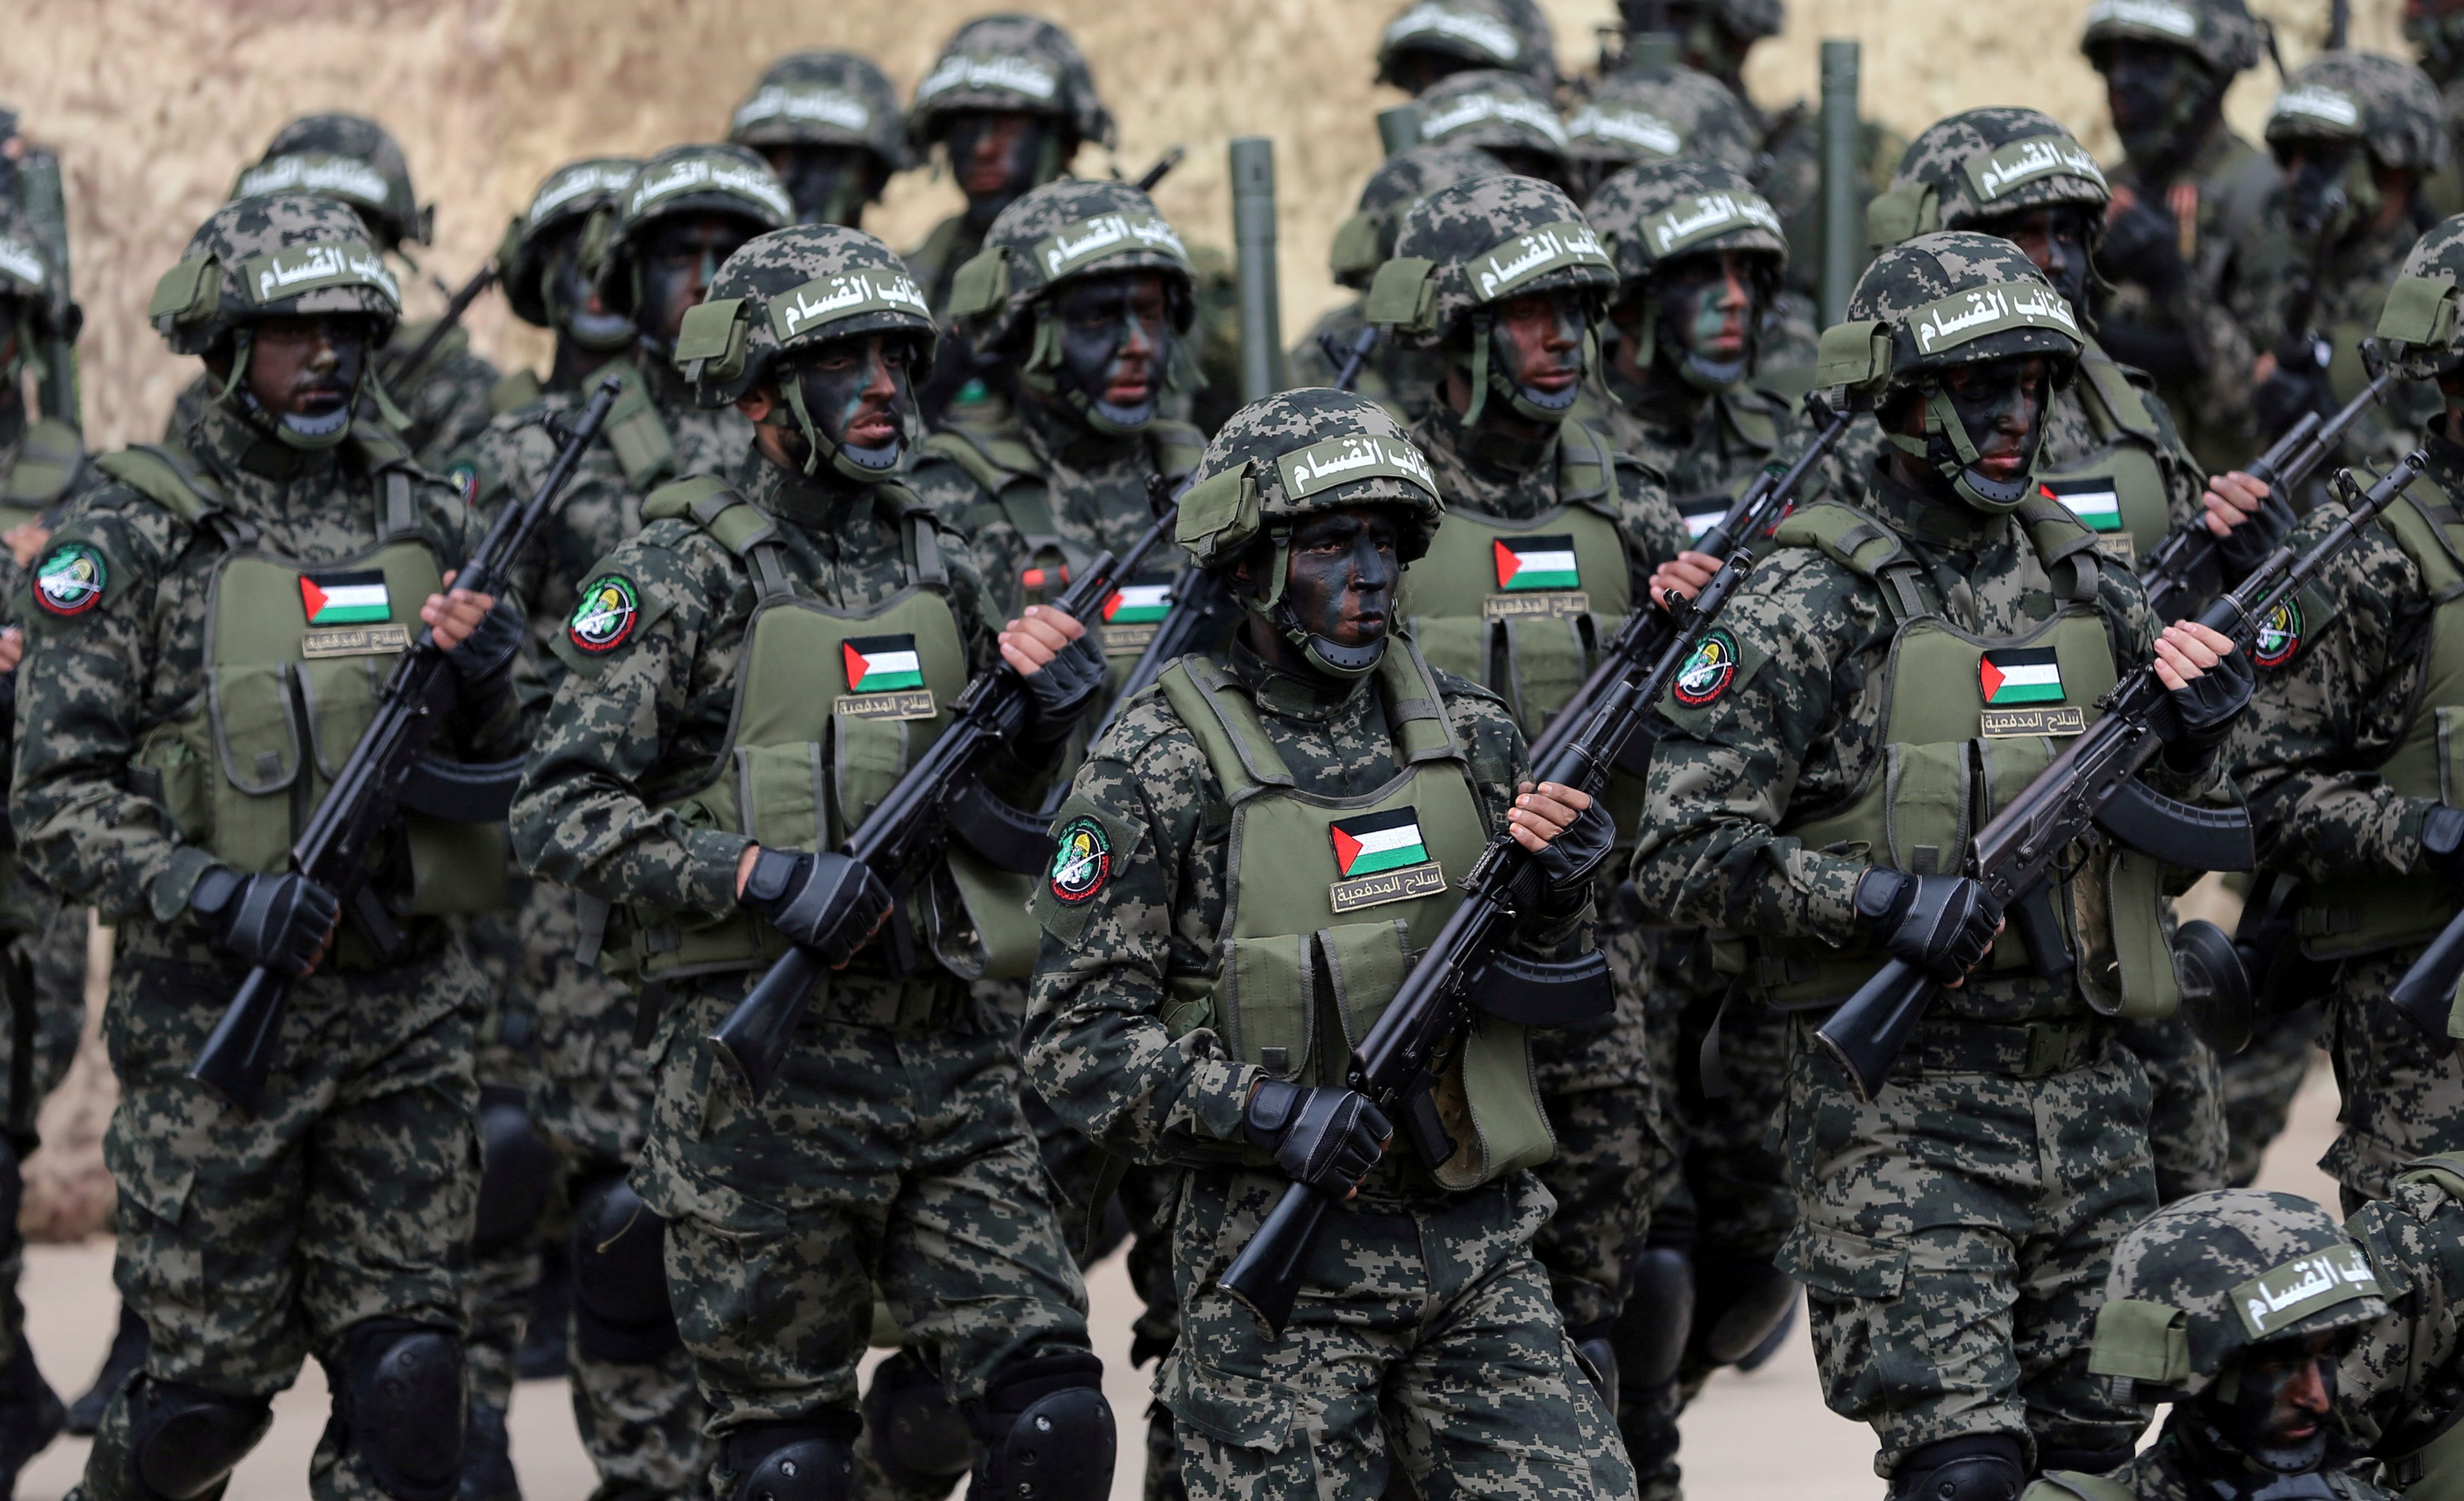 Why Did Hamas Conduct a Wide-Scale Military Exercise in Gaza?